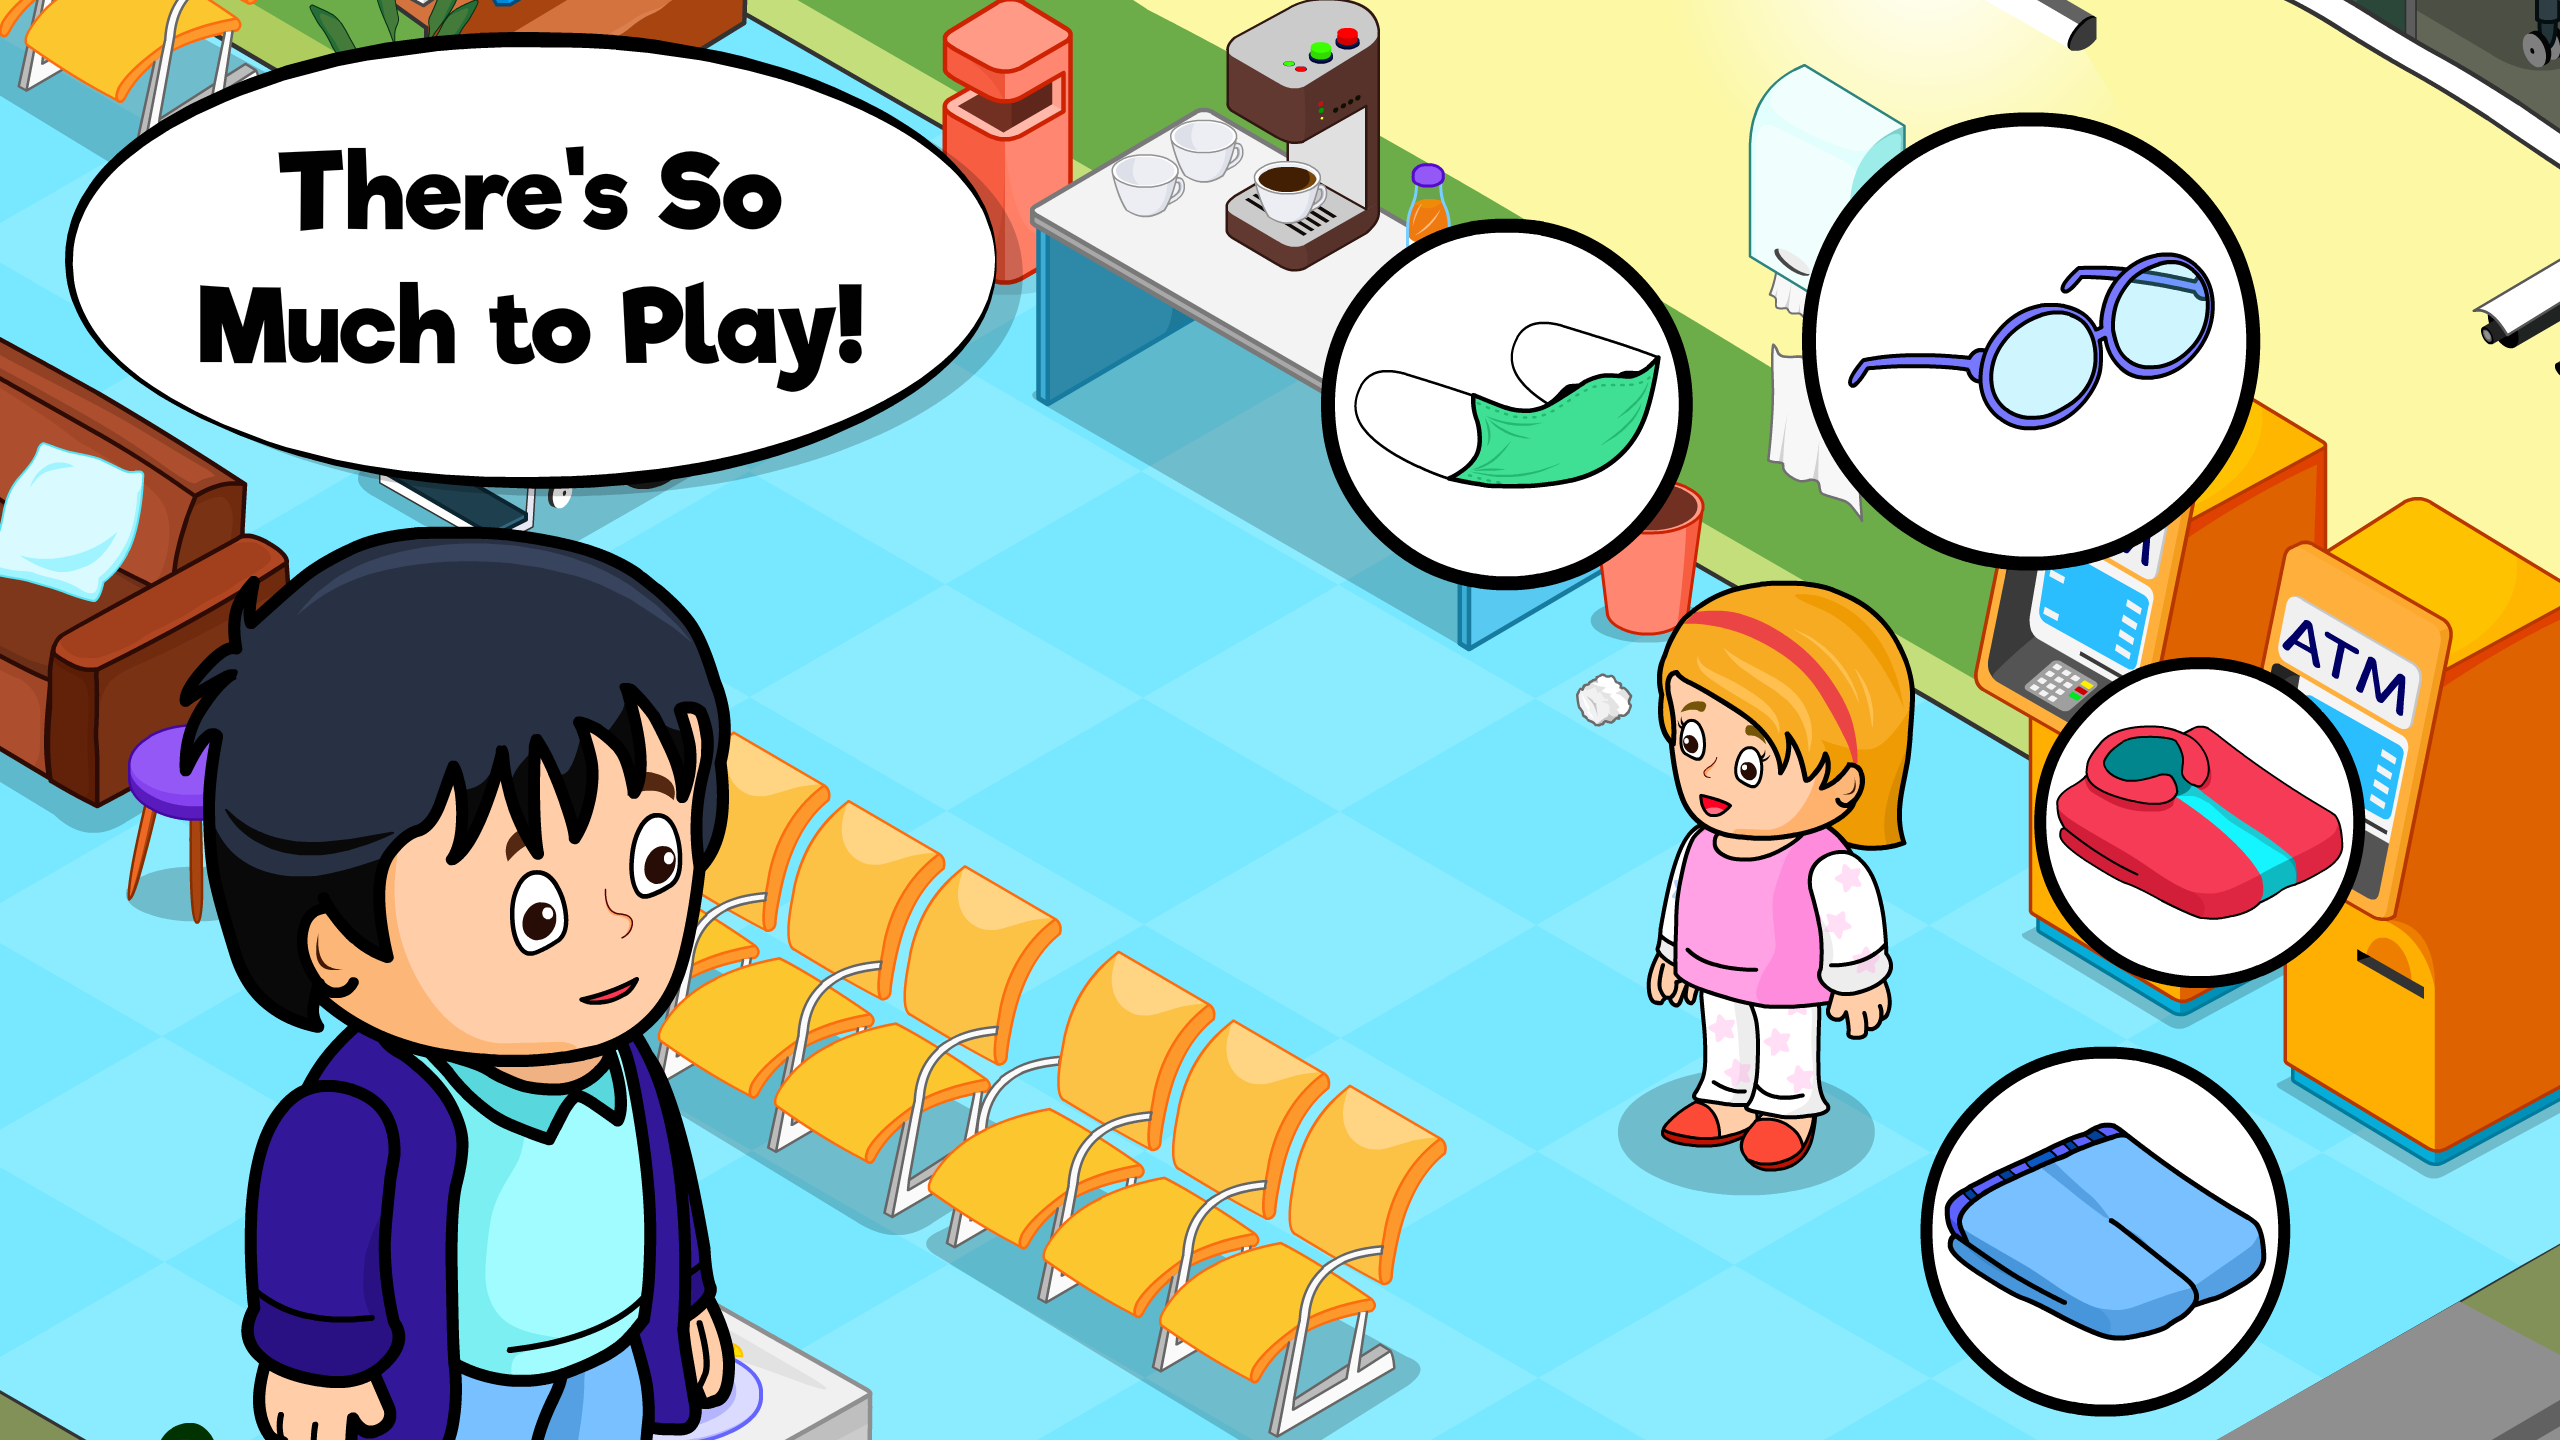 🏥 My Hospital Town: Free Doctor Games for Kids 🏥のキャプチャ